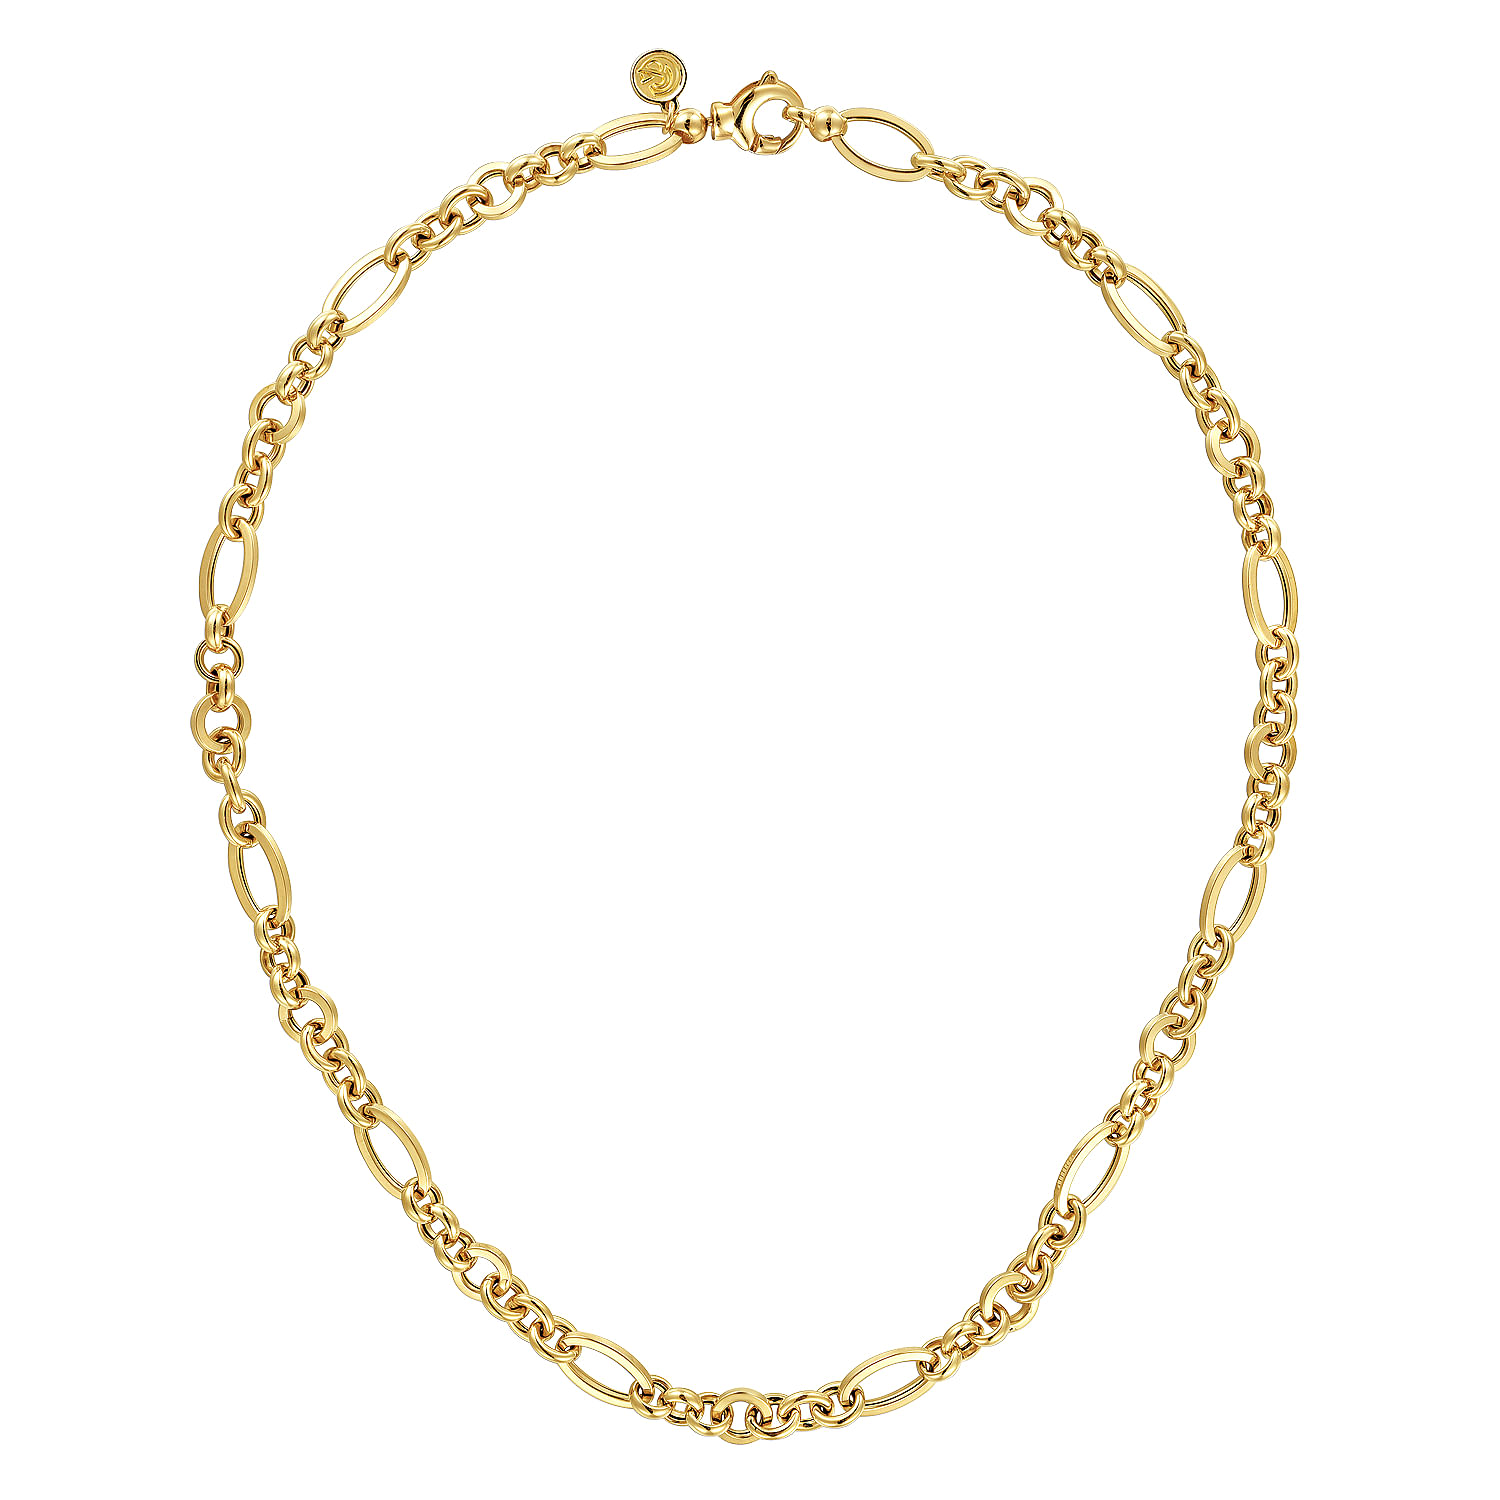 14K Yellow Gold Link Chain Necklace with Oval Stations